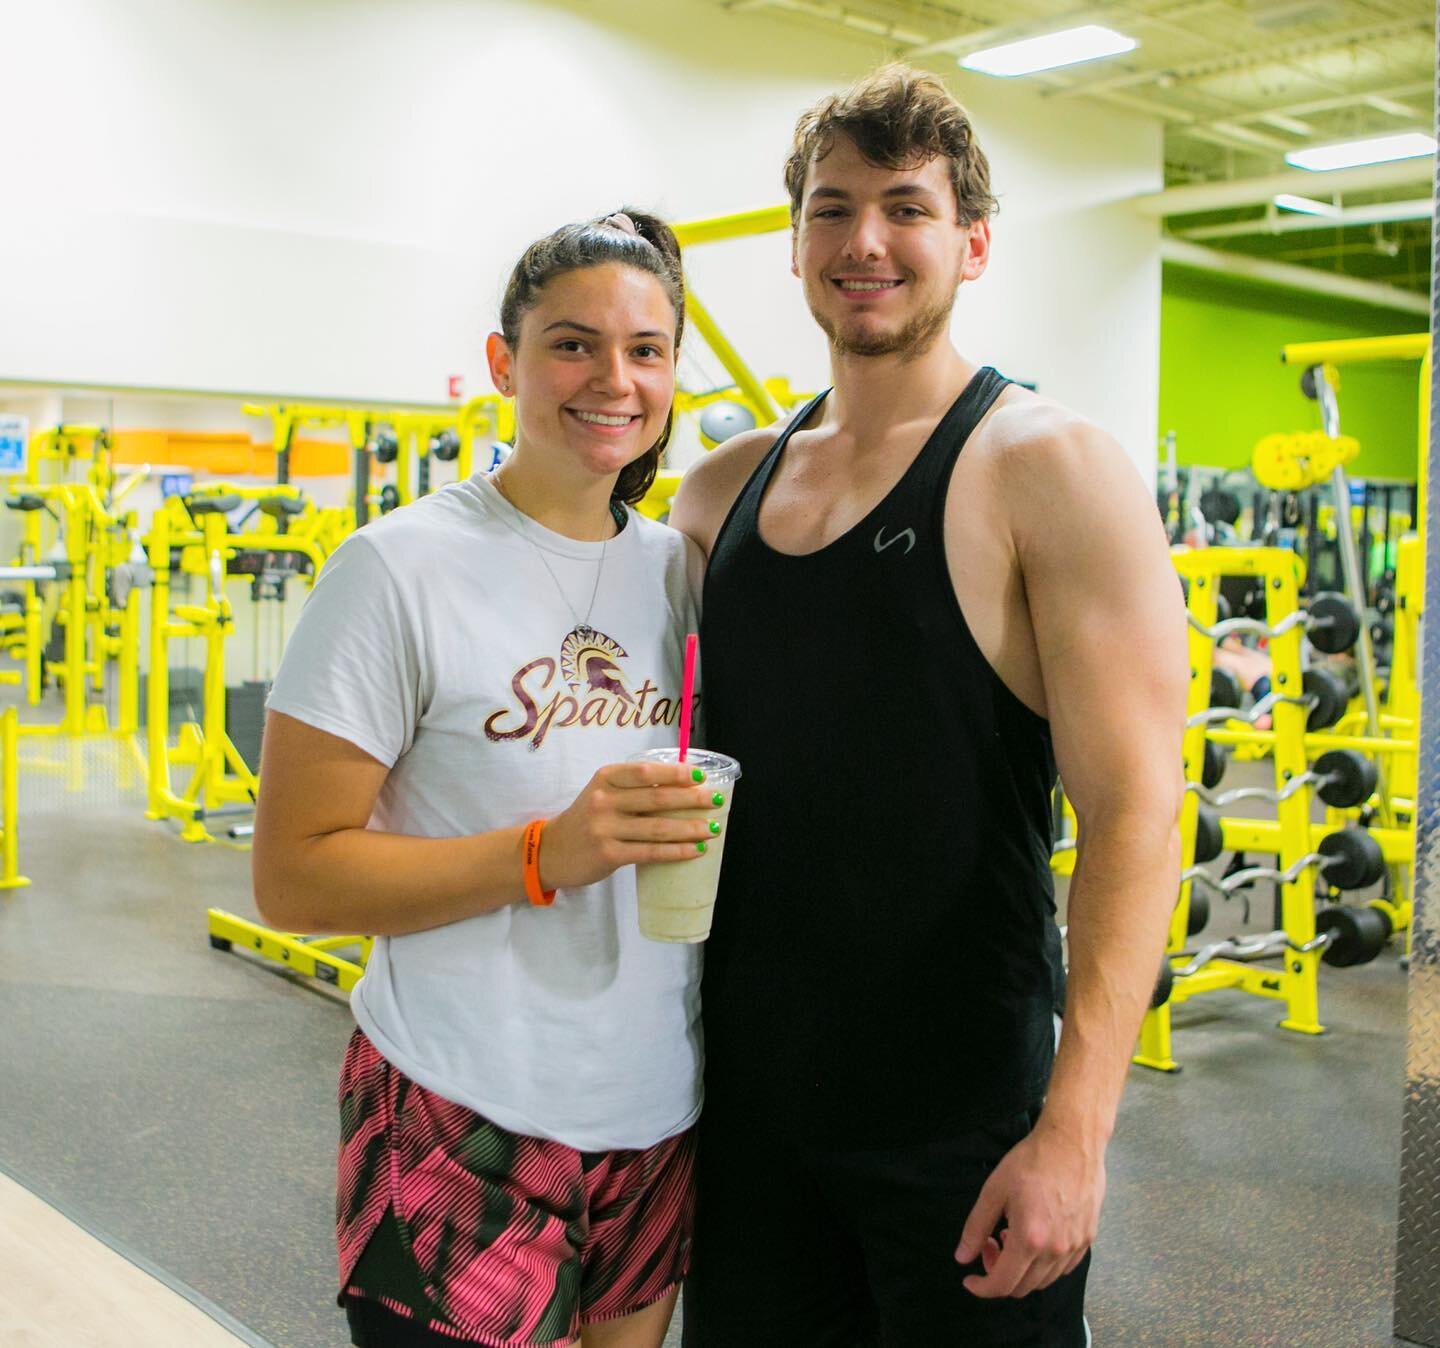 Another amazing couple in our BLC community Melissa @melissa_alifano and Rick @rick_johannes enjoying a post workout smoothie blend &ldquo;Spirulina Swirl&rdquo; 💪💙